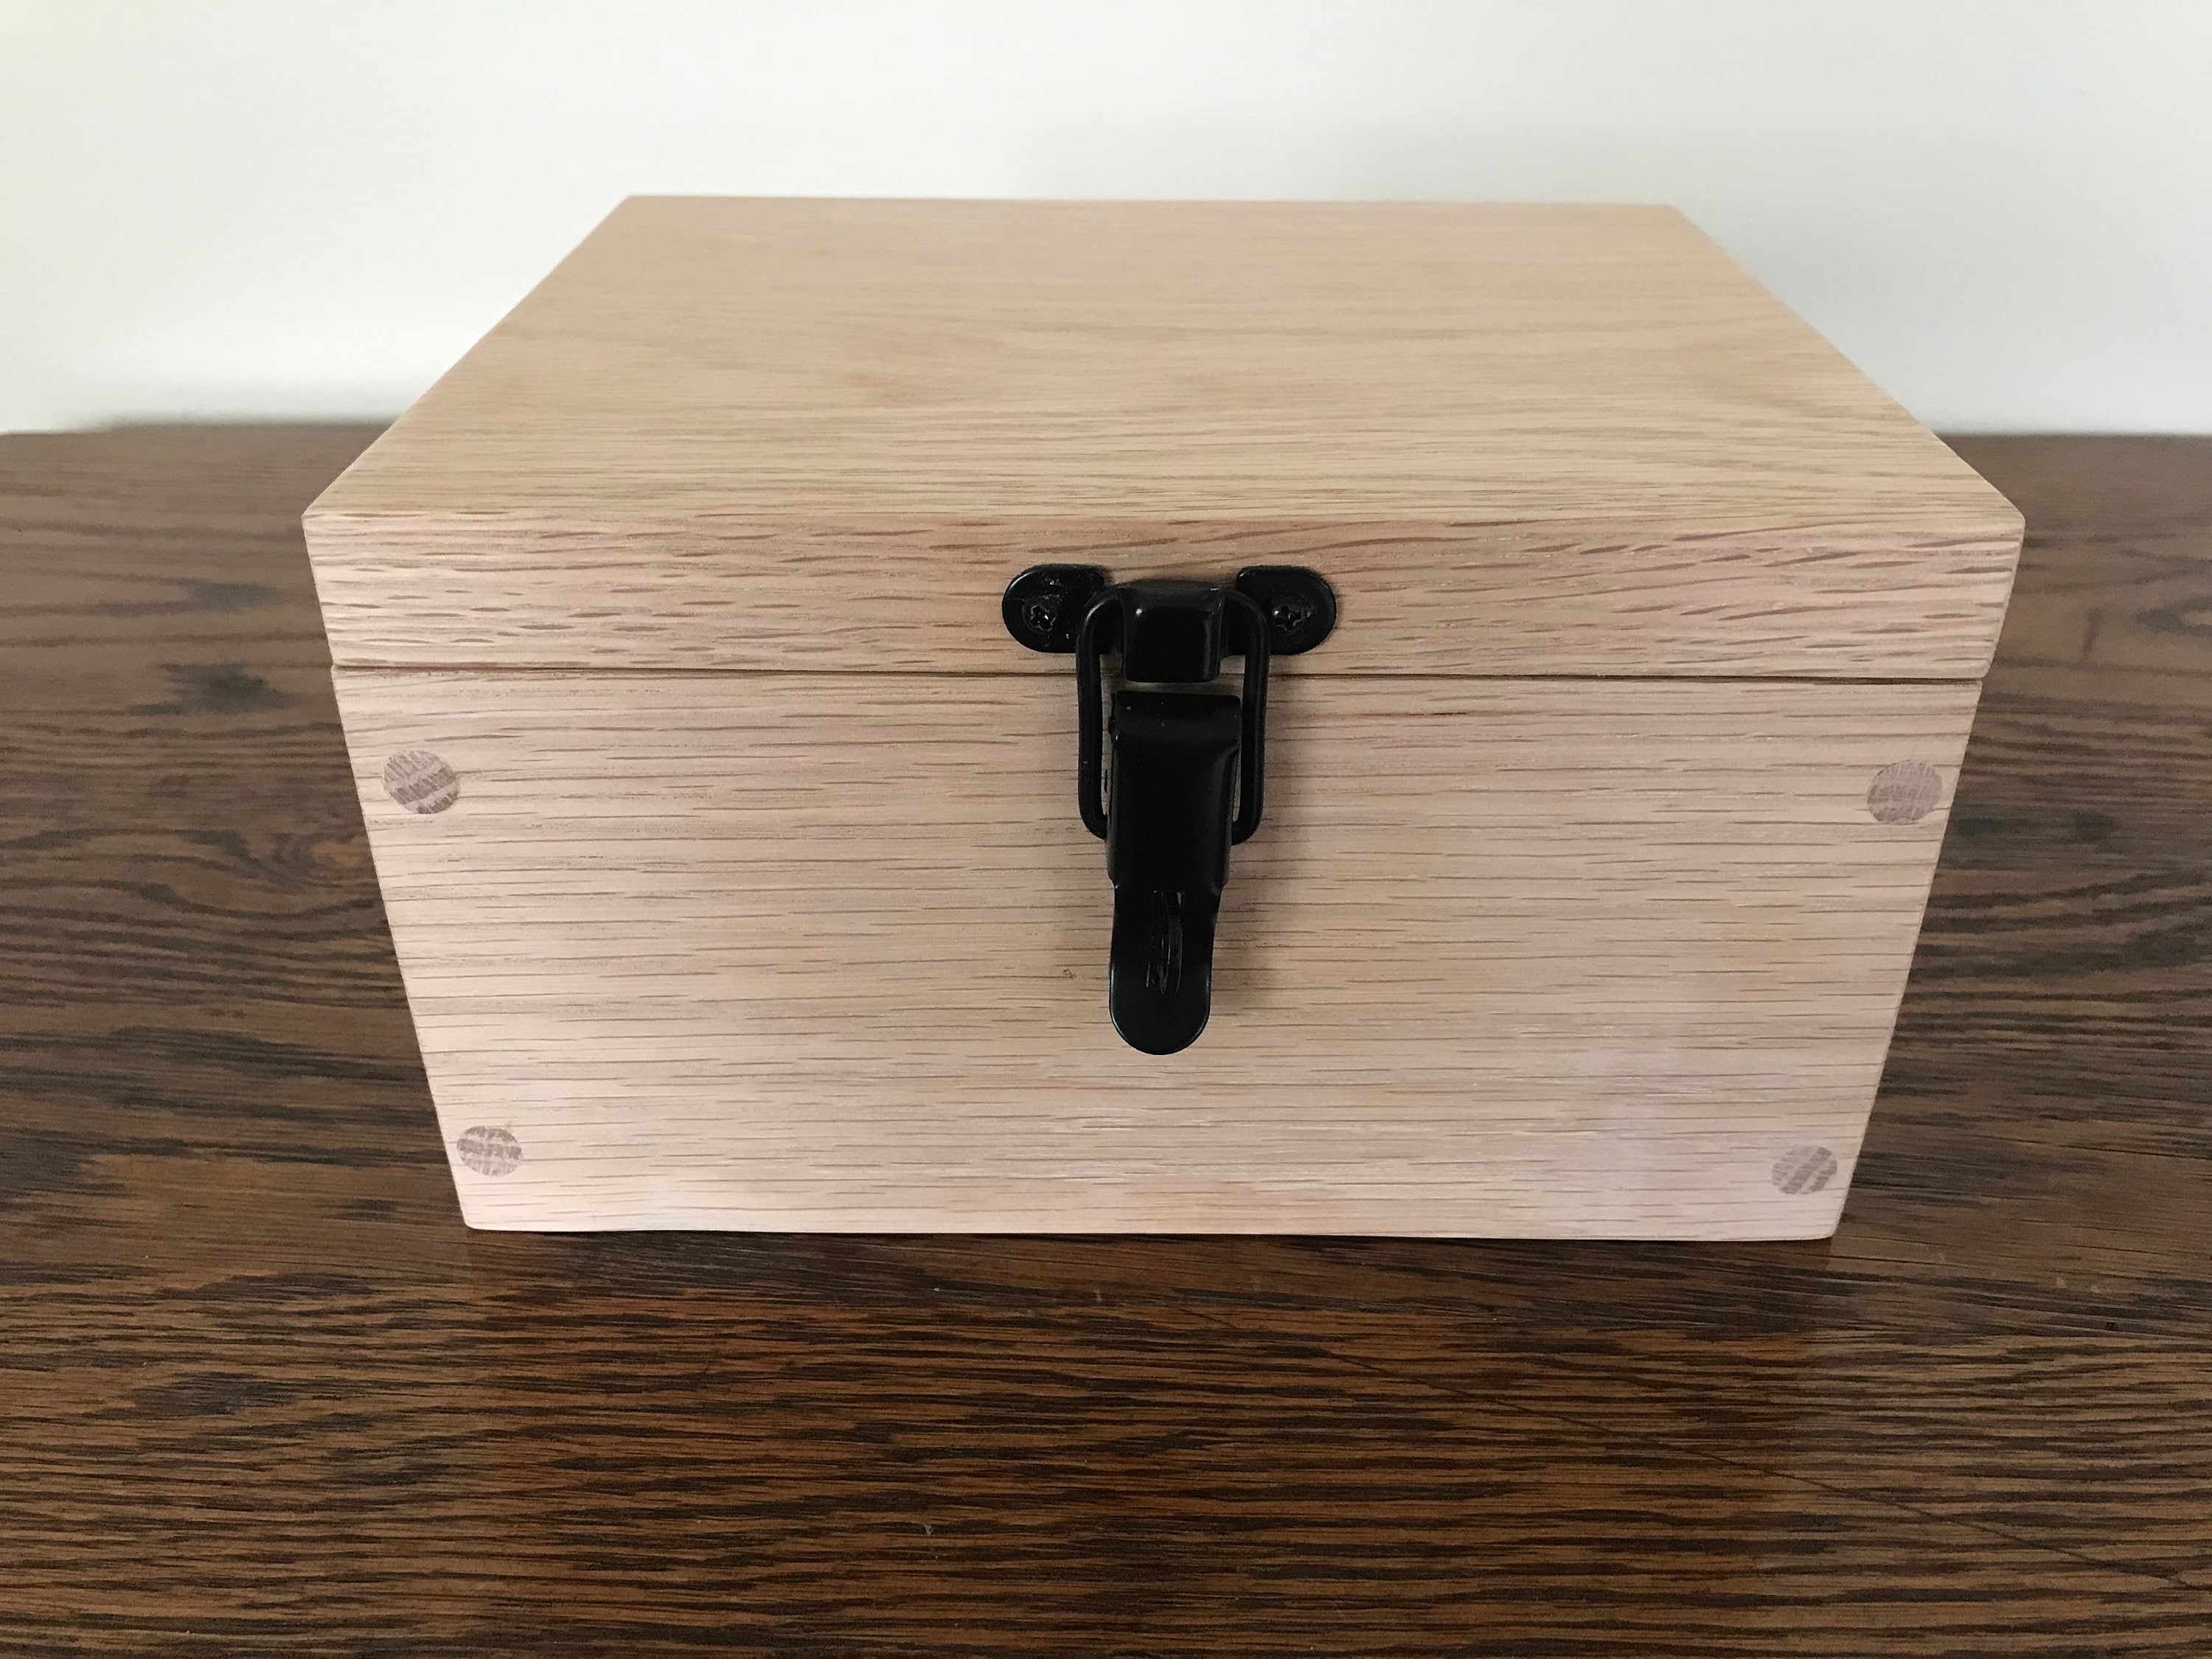 Unfinished Wooden Wine Box w/ Hinges & Lock- Holds 2 Bottles of  Wine-unfinished wood box-engravable wood box-personalized laser engraving